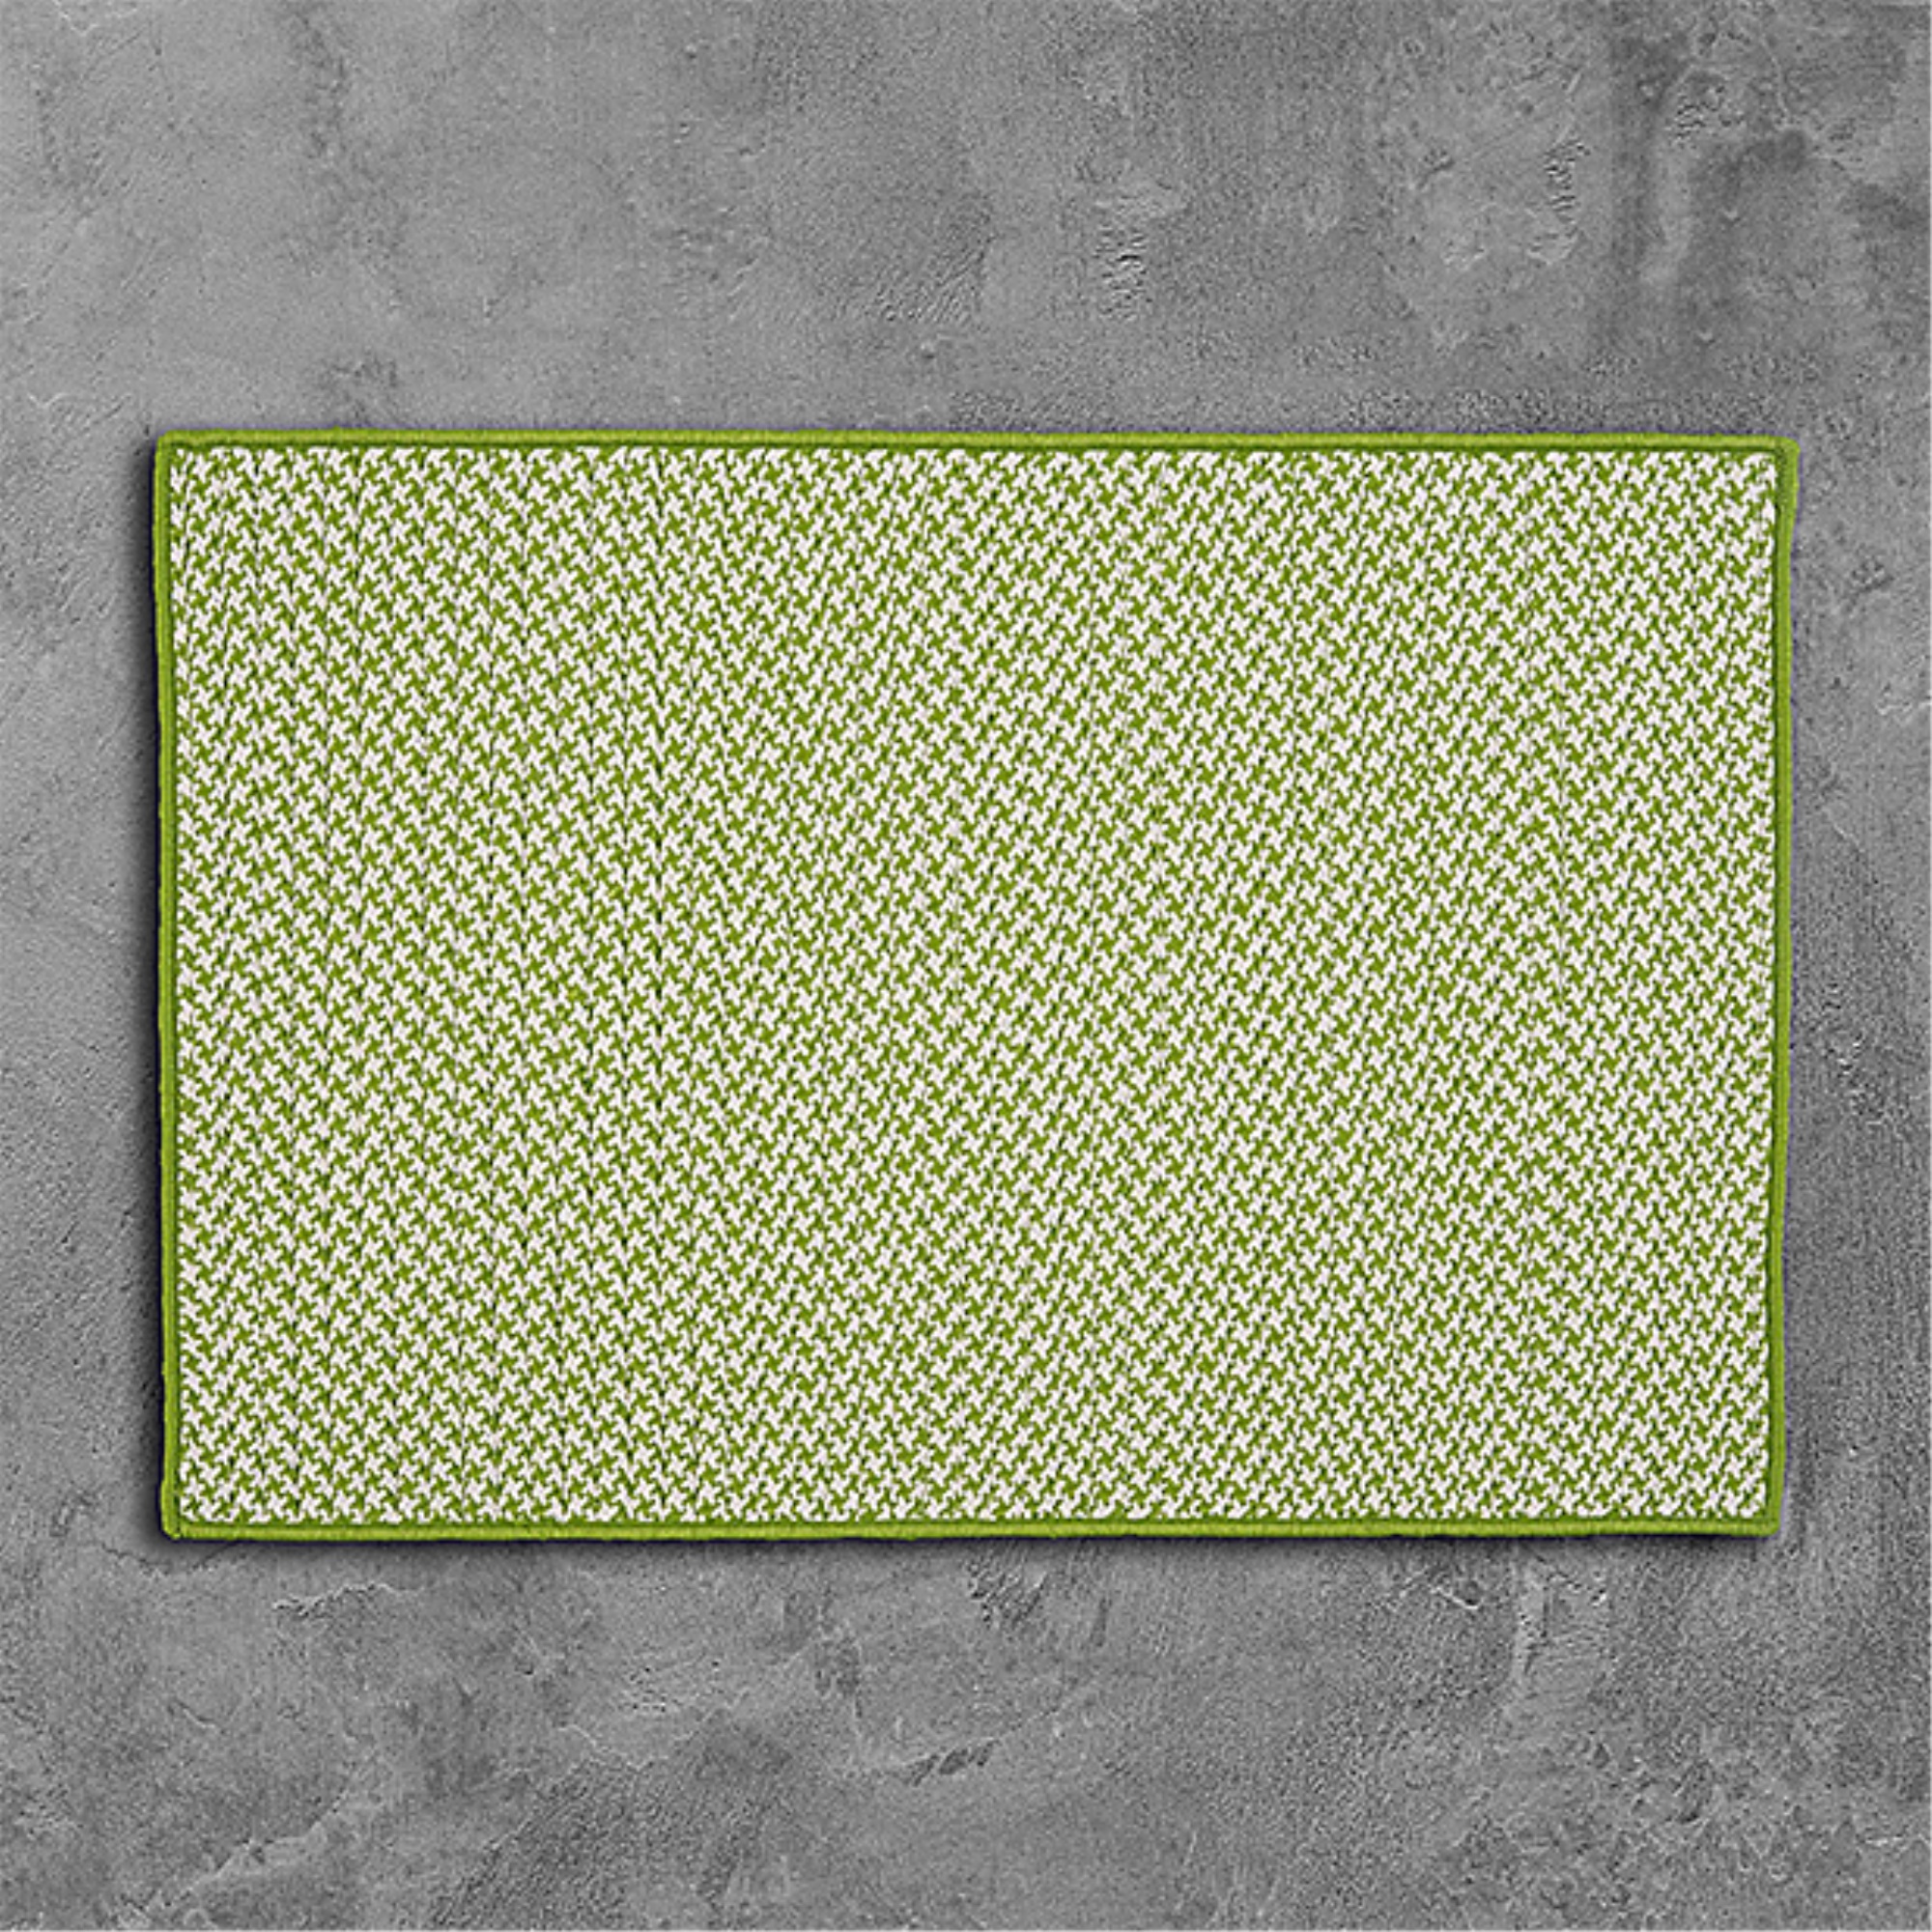 Colonial Mills Outdoor Houndstooth Tweed - Lime 8'x11' - image 1 of 2